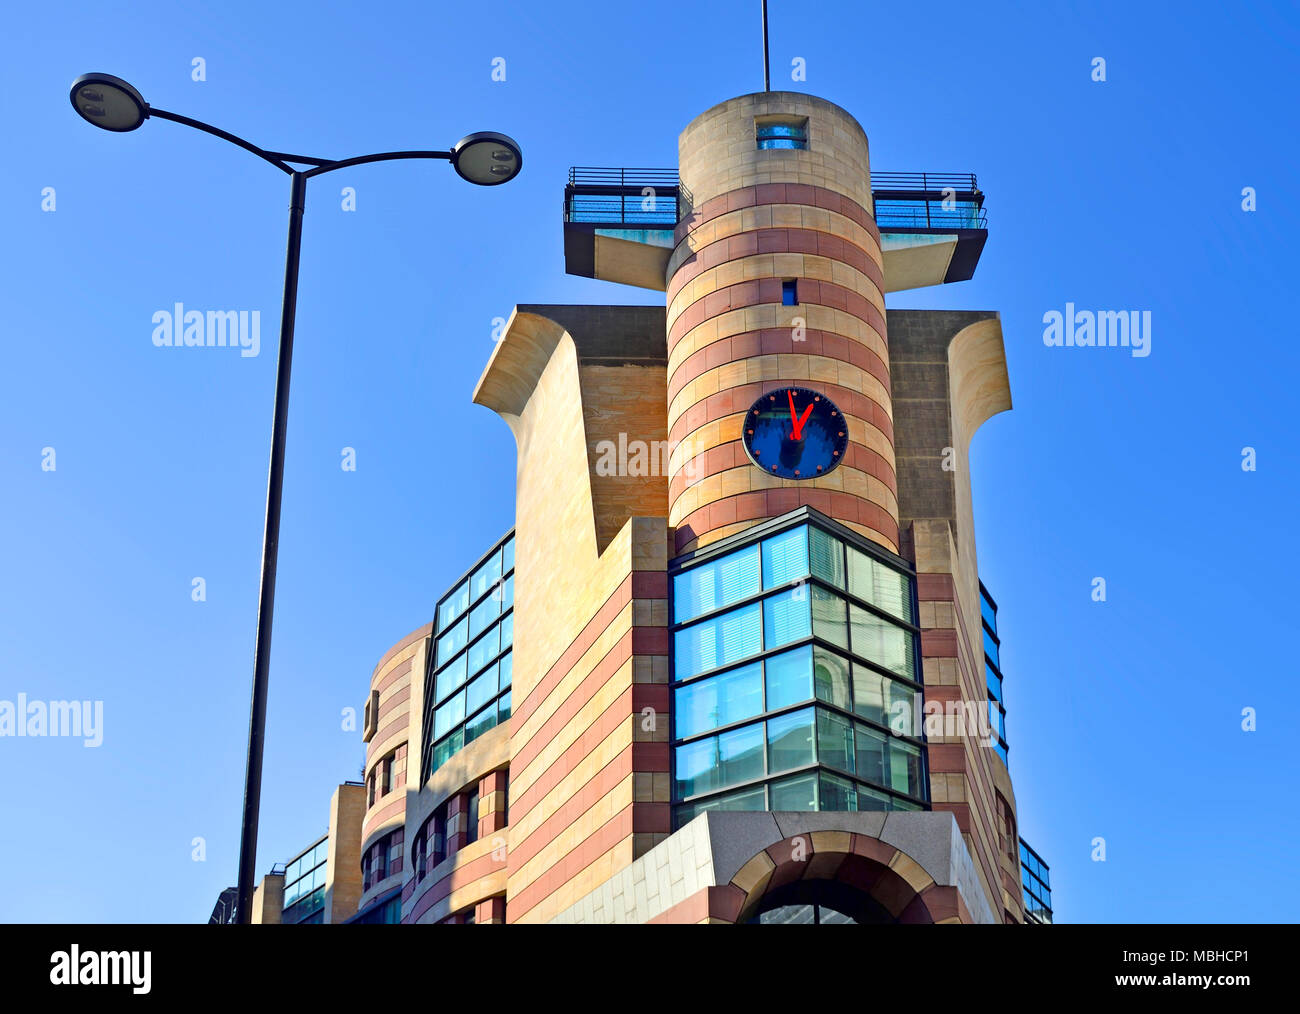 London, England, UK. No 1 Poultry (1997 - James Stirling) - office and retail building at the junction of Poultry and Queen Victoria Street. Stock Photo